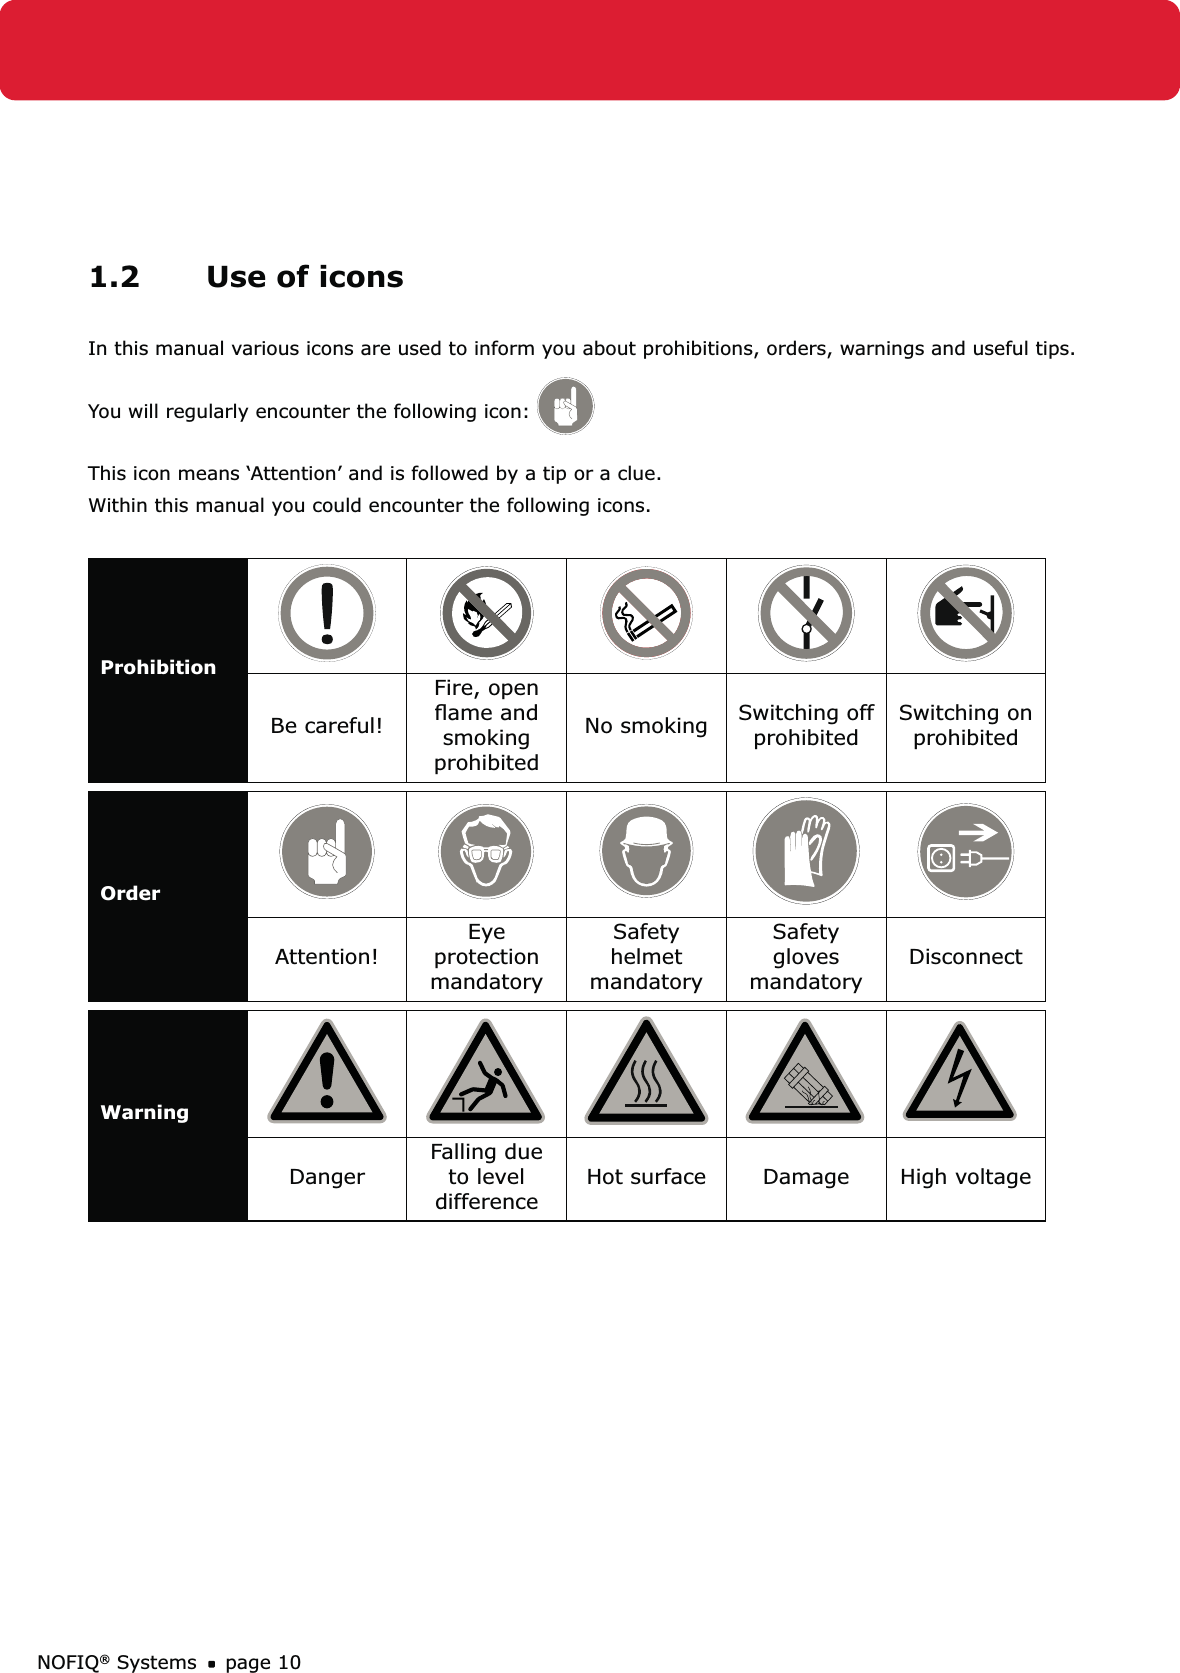 NOFIQ® Systems page 101.2  Use of iconsIn this manual various icons are used to inform you about prohibitions, orders, warnings and useful tips. You will regularly encounter the following icon: This icon means ‘Attention’ and is followed by a tip or a clue.Within this manual you could encounter the following icons.ProhibitionBe careful!Fire, open ﬂame and smoking prohibitedNo smoking Switching off prohibitedSwitching on prohibitedOrderAttention!Eye protection mandatorySafety helmet mandatorySafety gloves mandatoryDisconnectWarningDangerFalling due to level difference Hot surface Damage High voltage